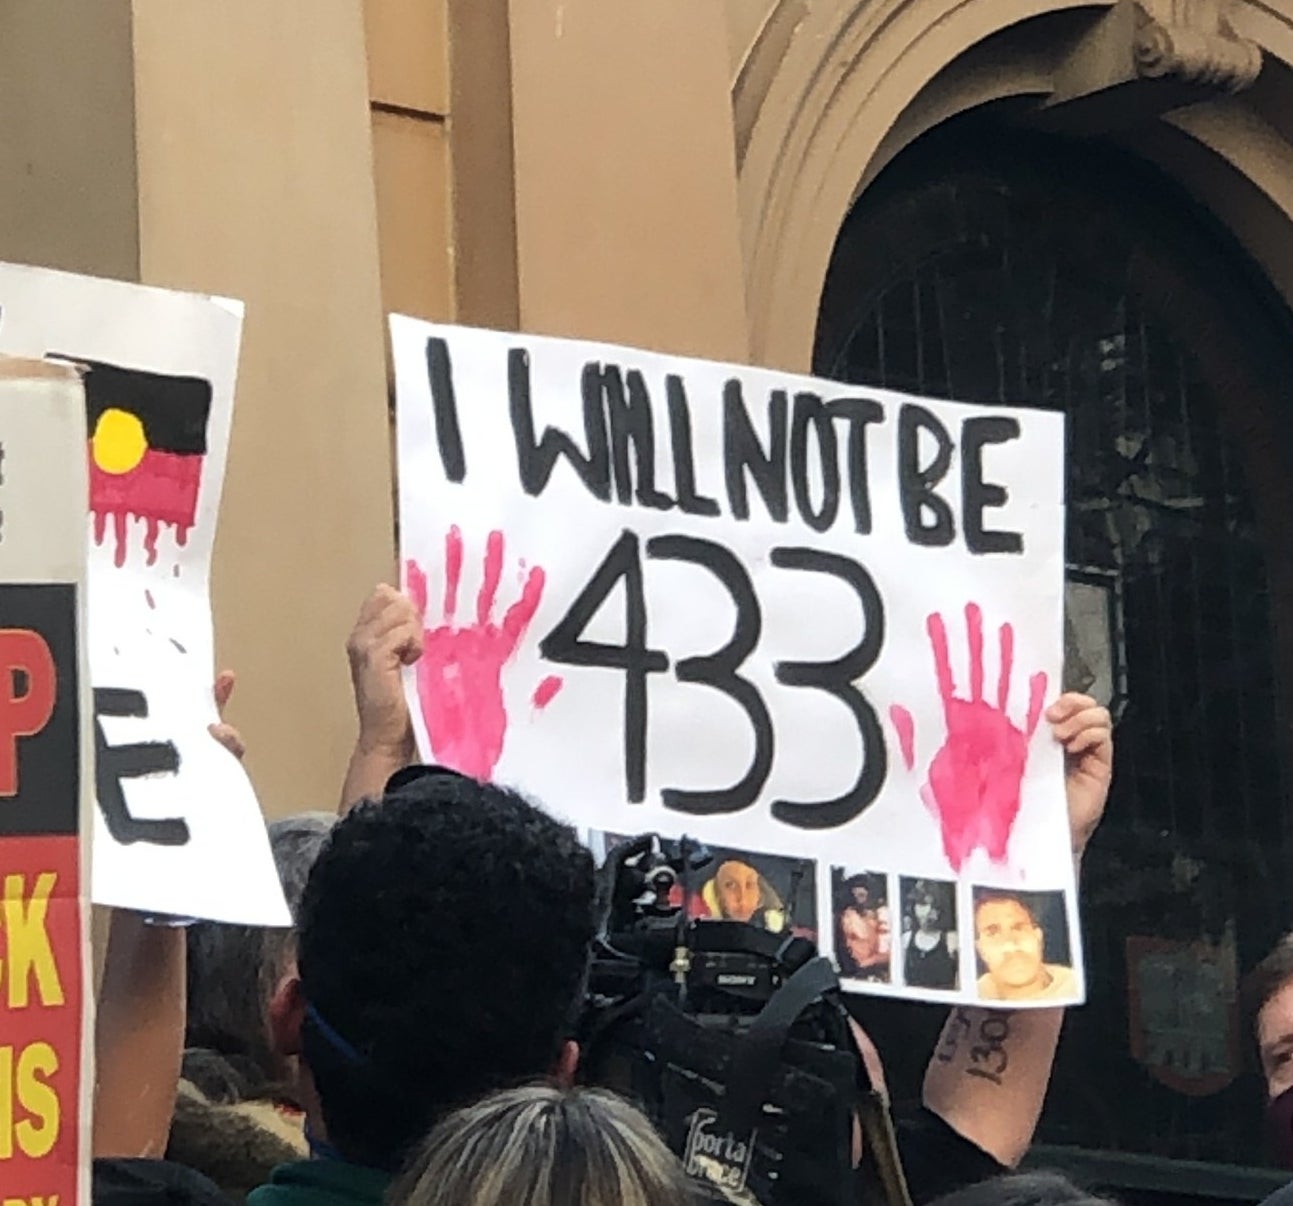 A protest sign reads &quot;I will not be 433&quot;.